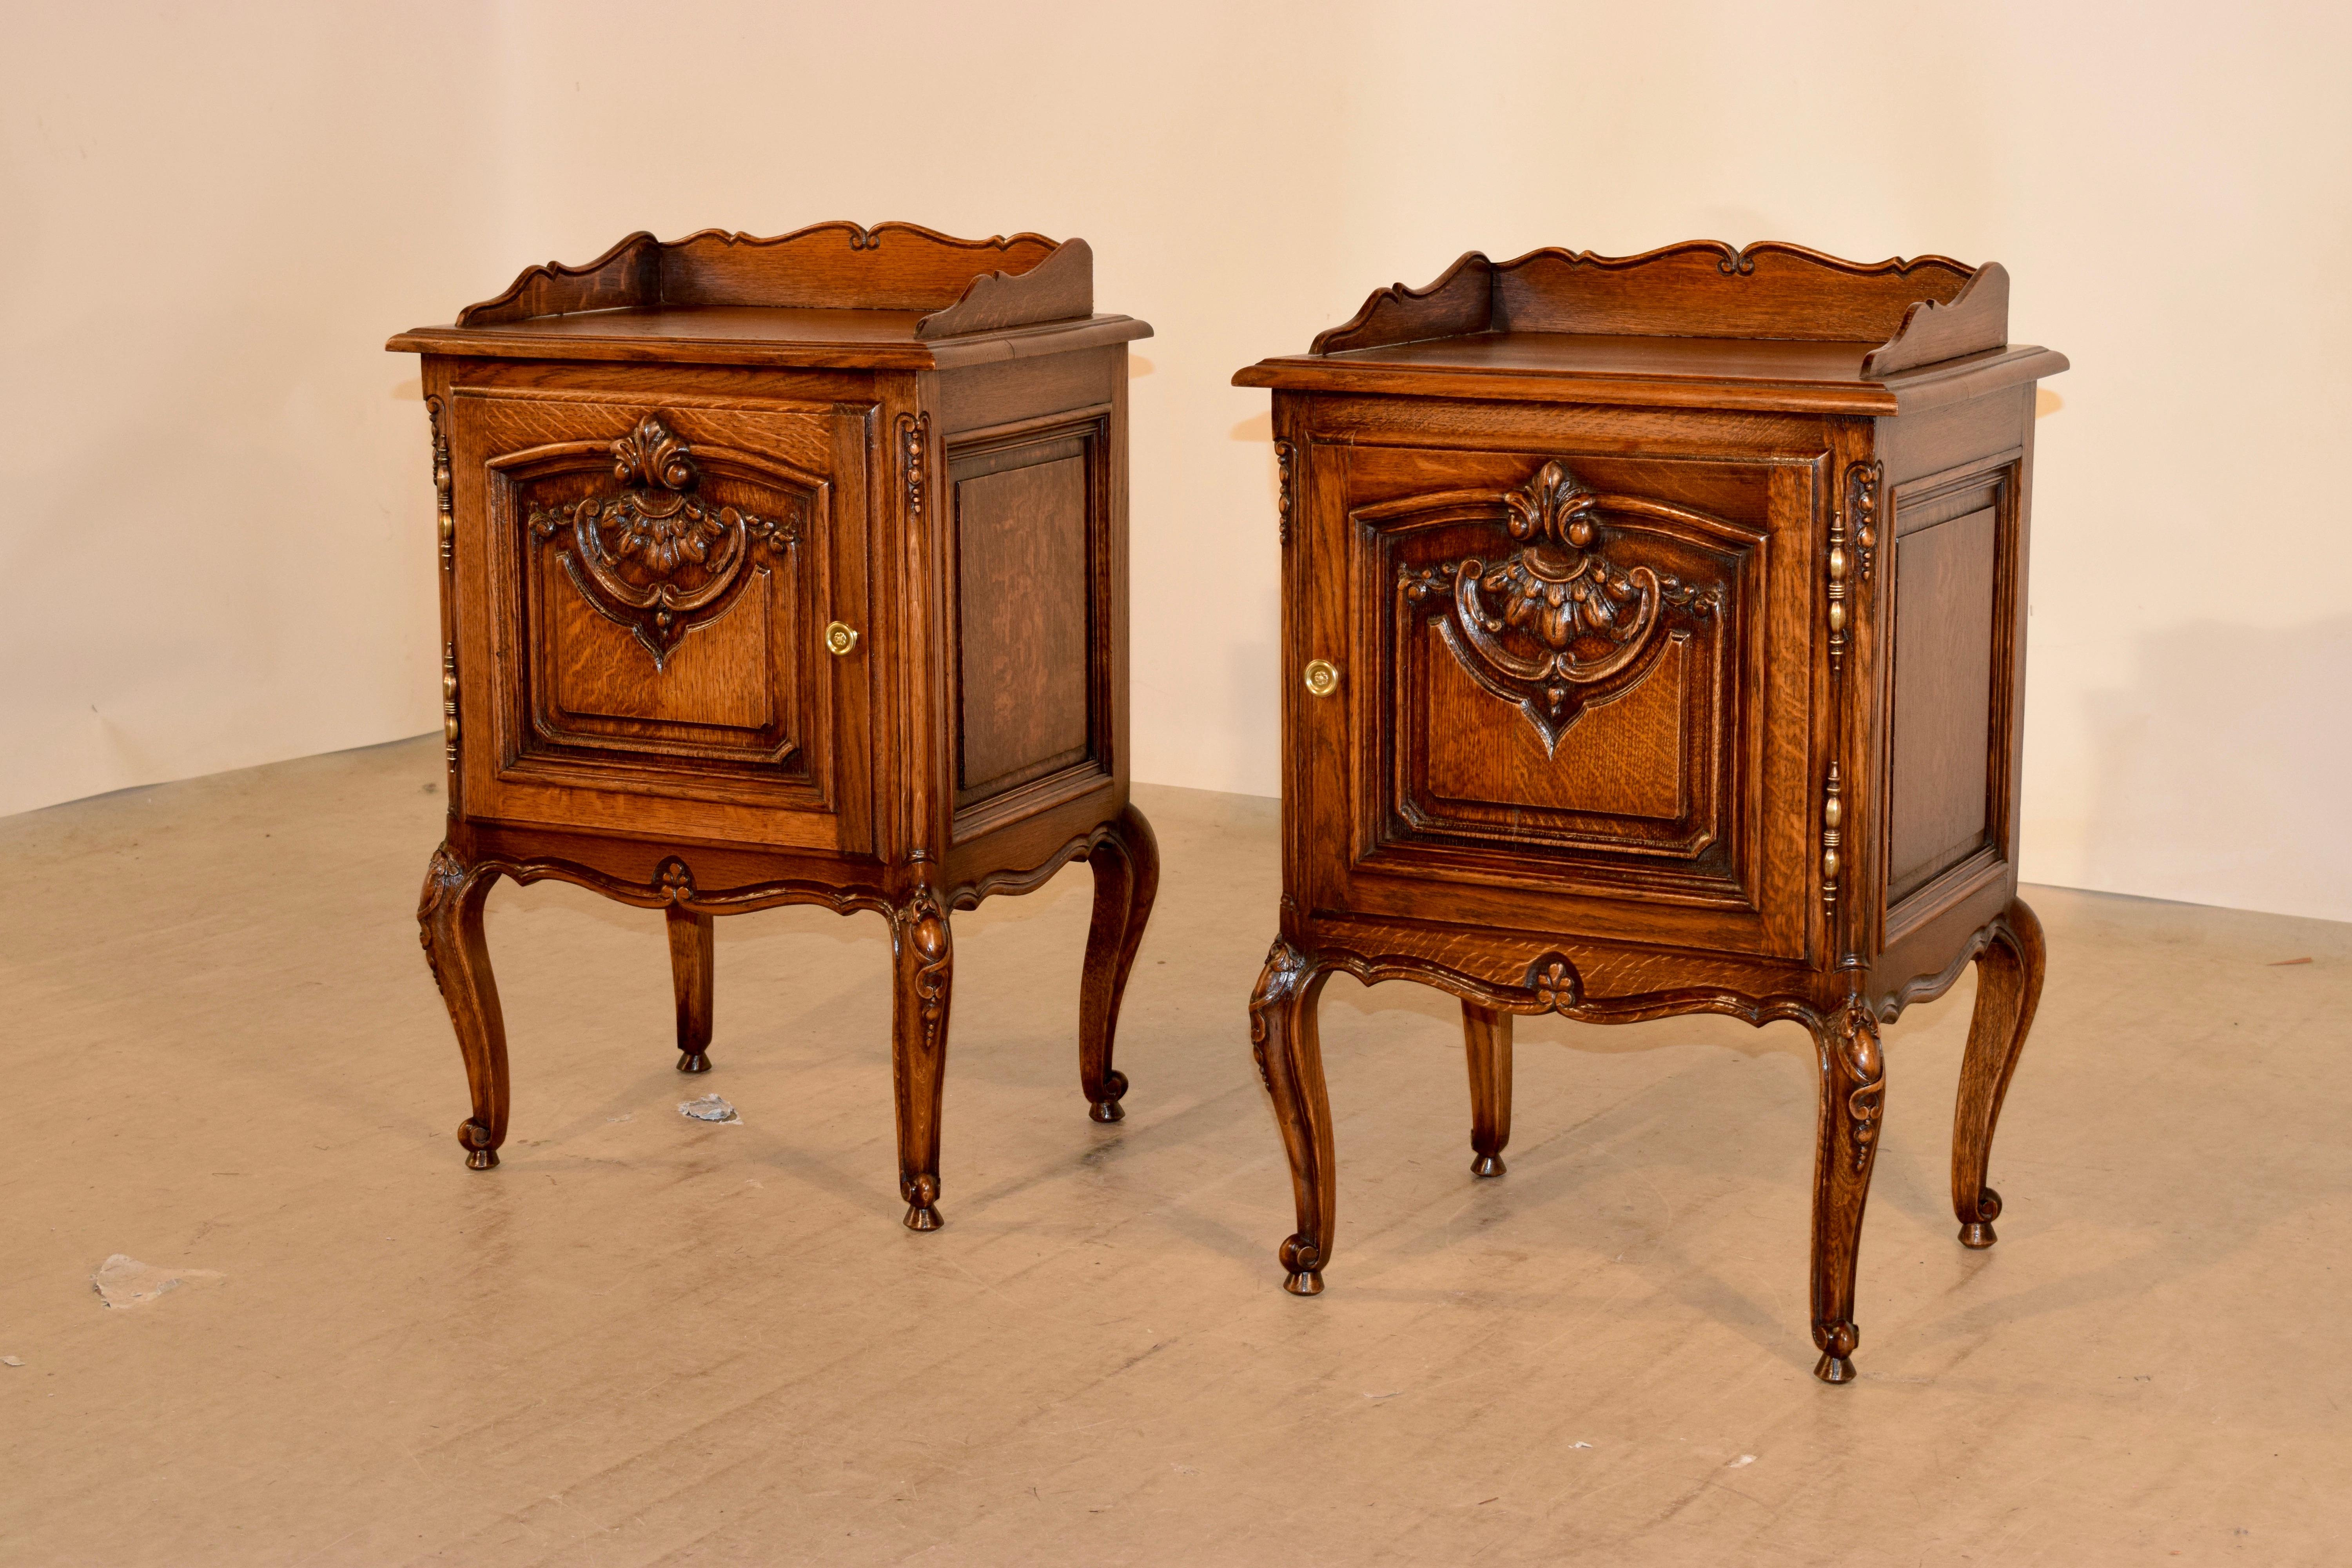 Hand-Carved Pair of French Oak Bedsides, circa 1900